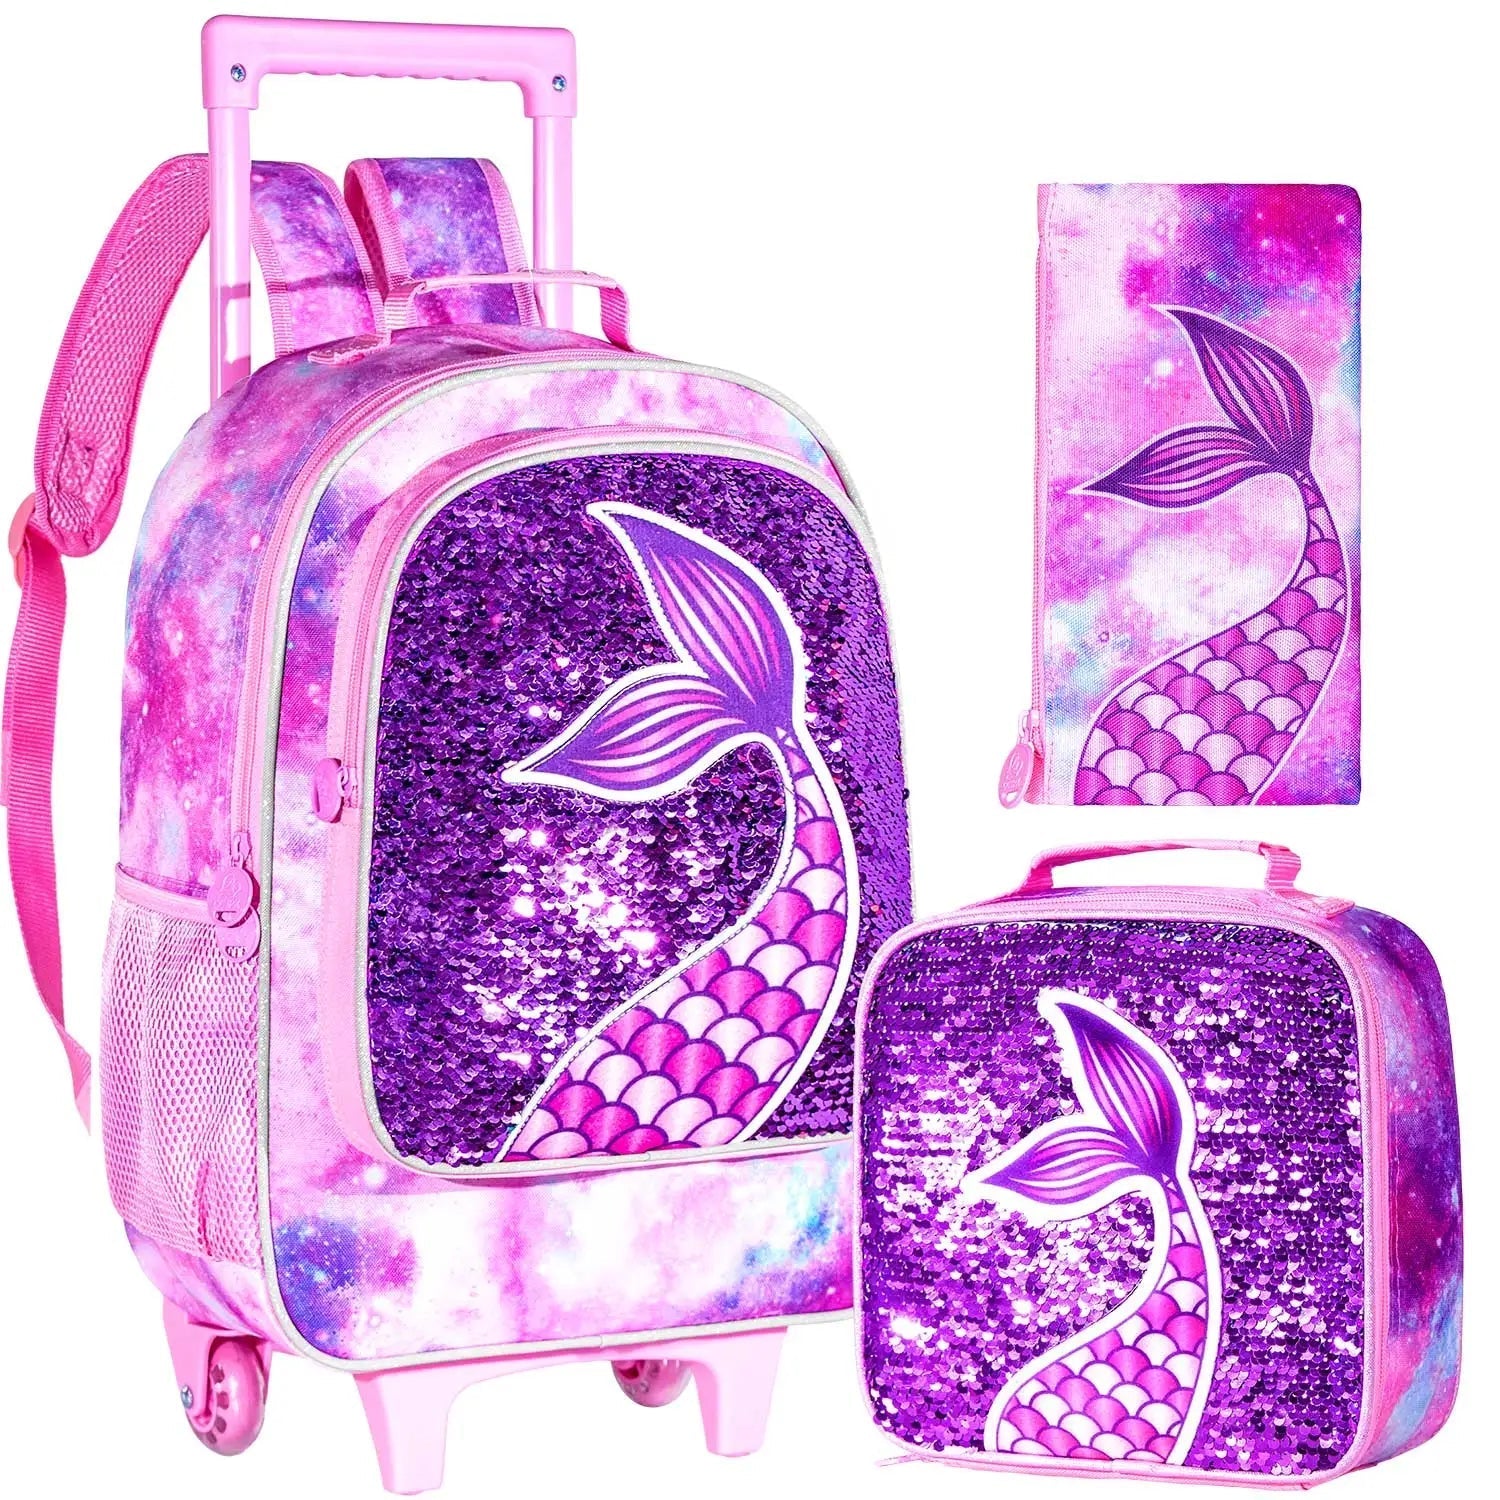 Girls' 3PCS Rolling Backpack Set - Pink Fishtail Design with Glow-in-the-dark Function, Roller Wheels, and Lunch Bag Pink